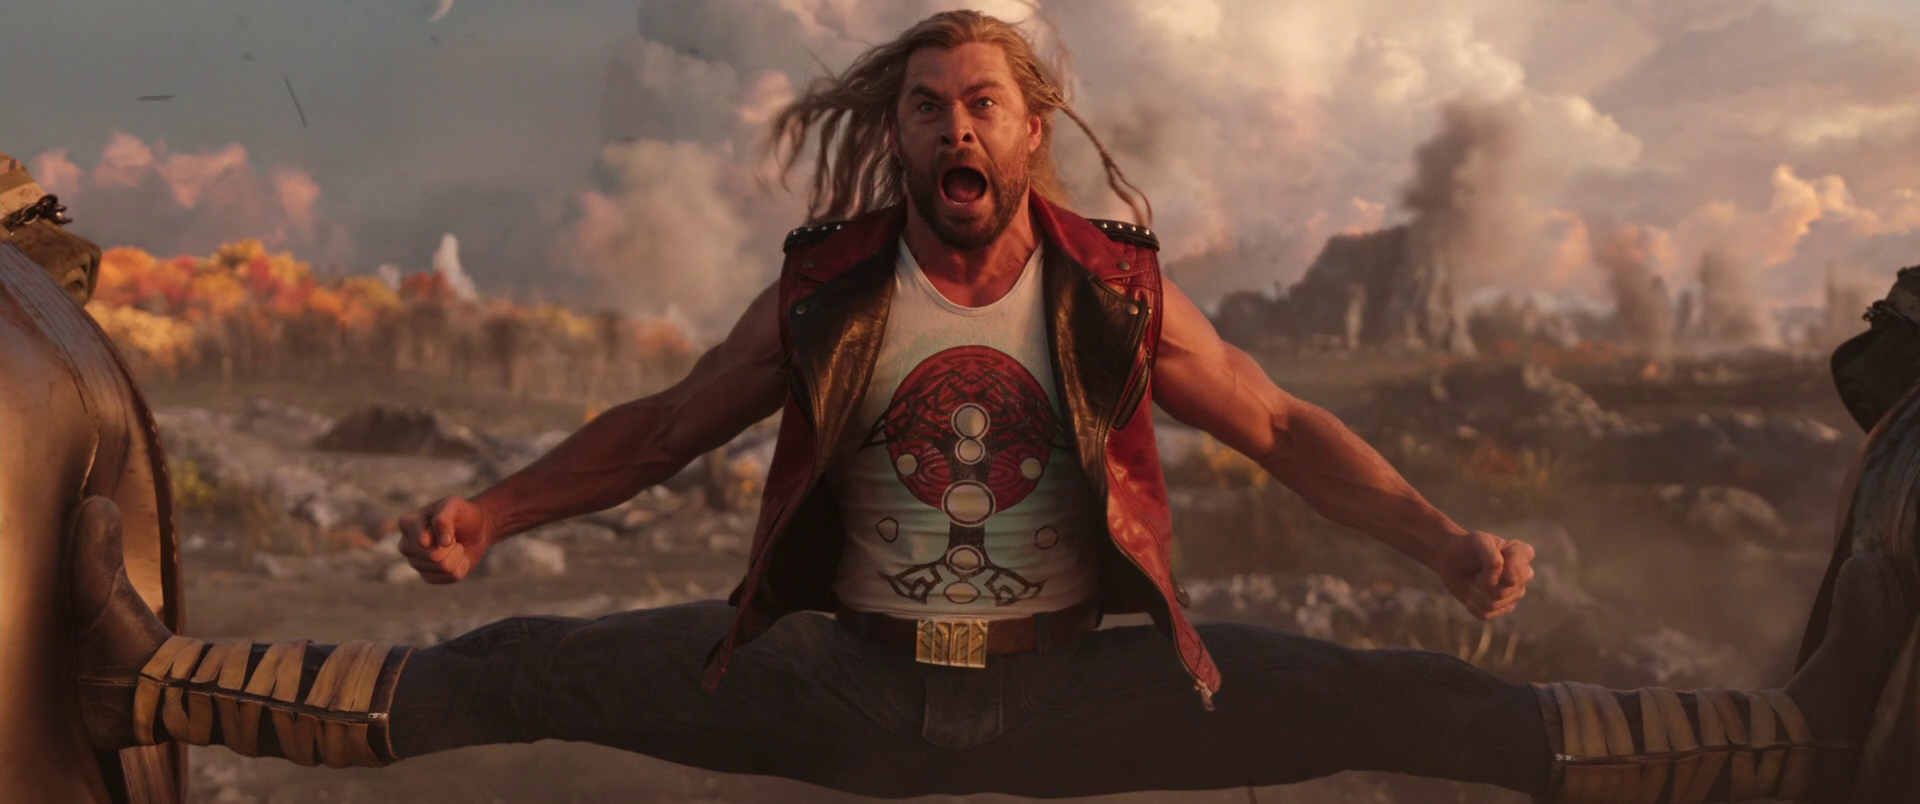 Chris Hemsworth Says His Return To The MCU Depends On Thor Being Portrayed “Drastically Different” From Taika Waititi’s Bastardization